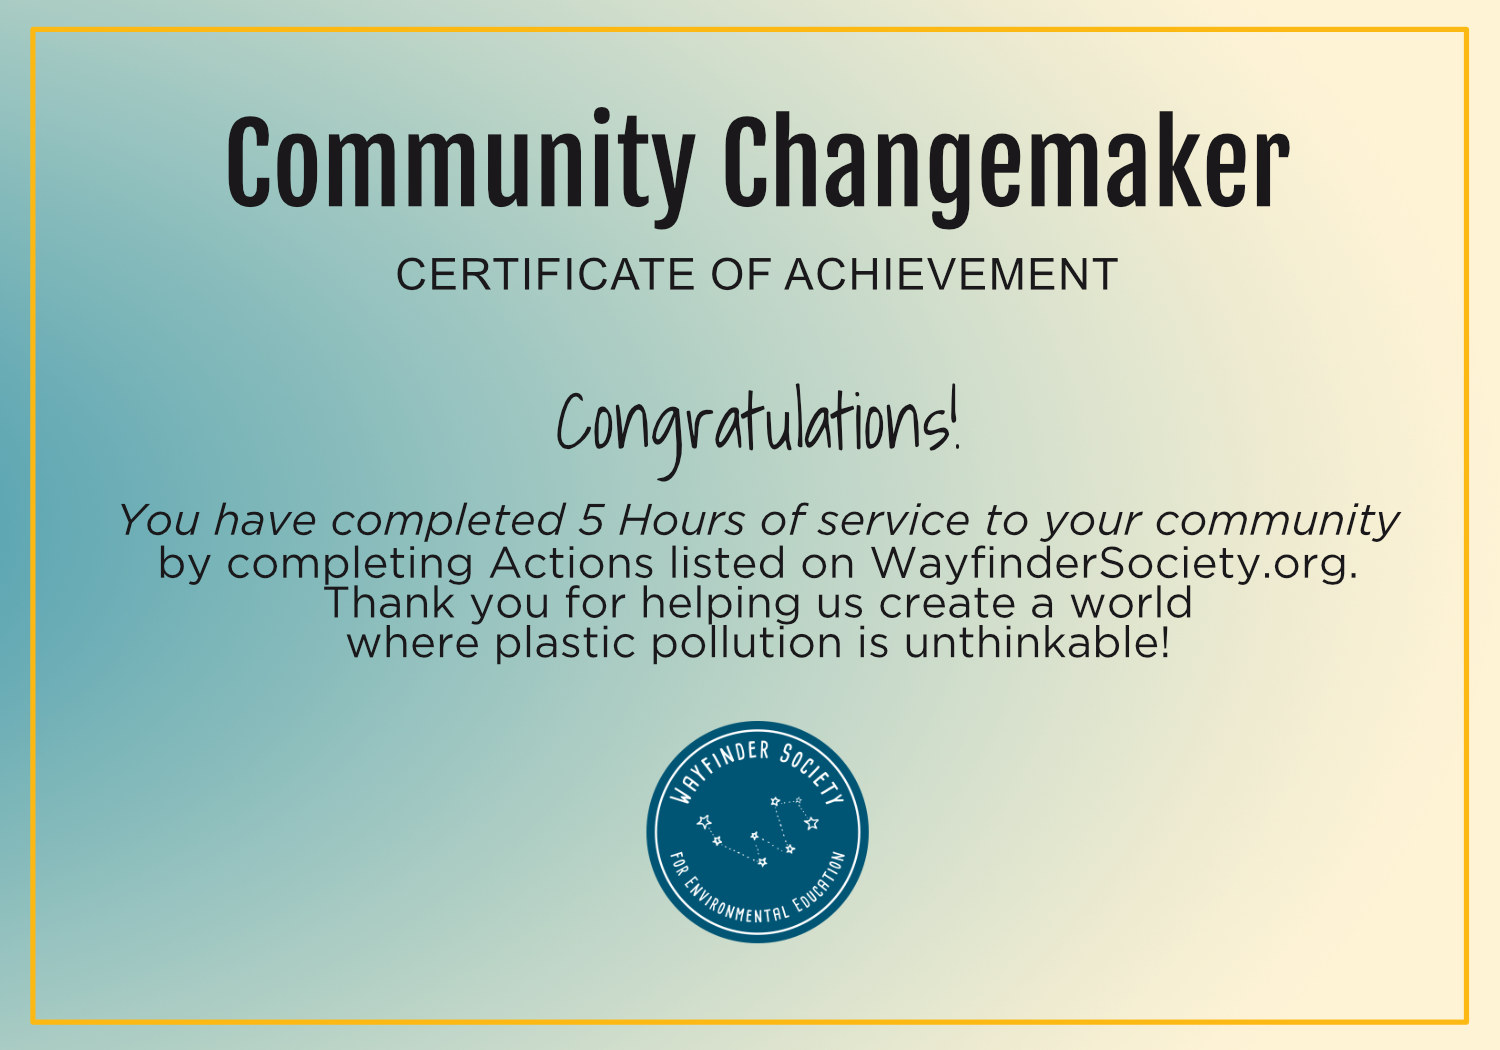 Community Changemaker Certificate earned by completing 5 Hours